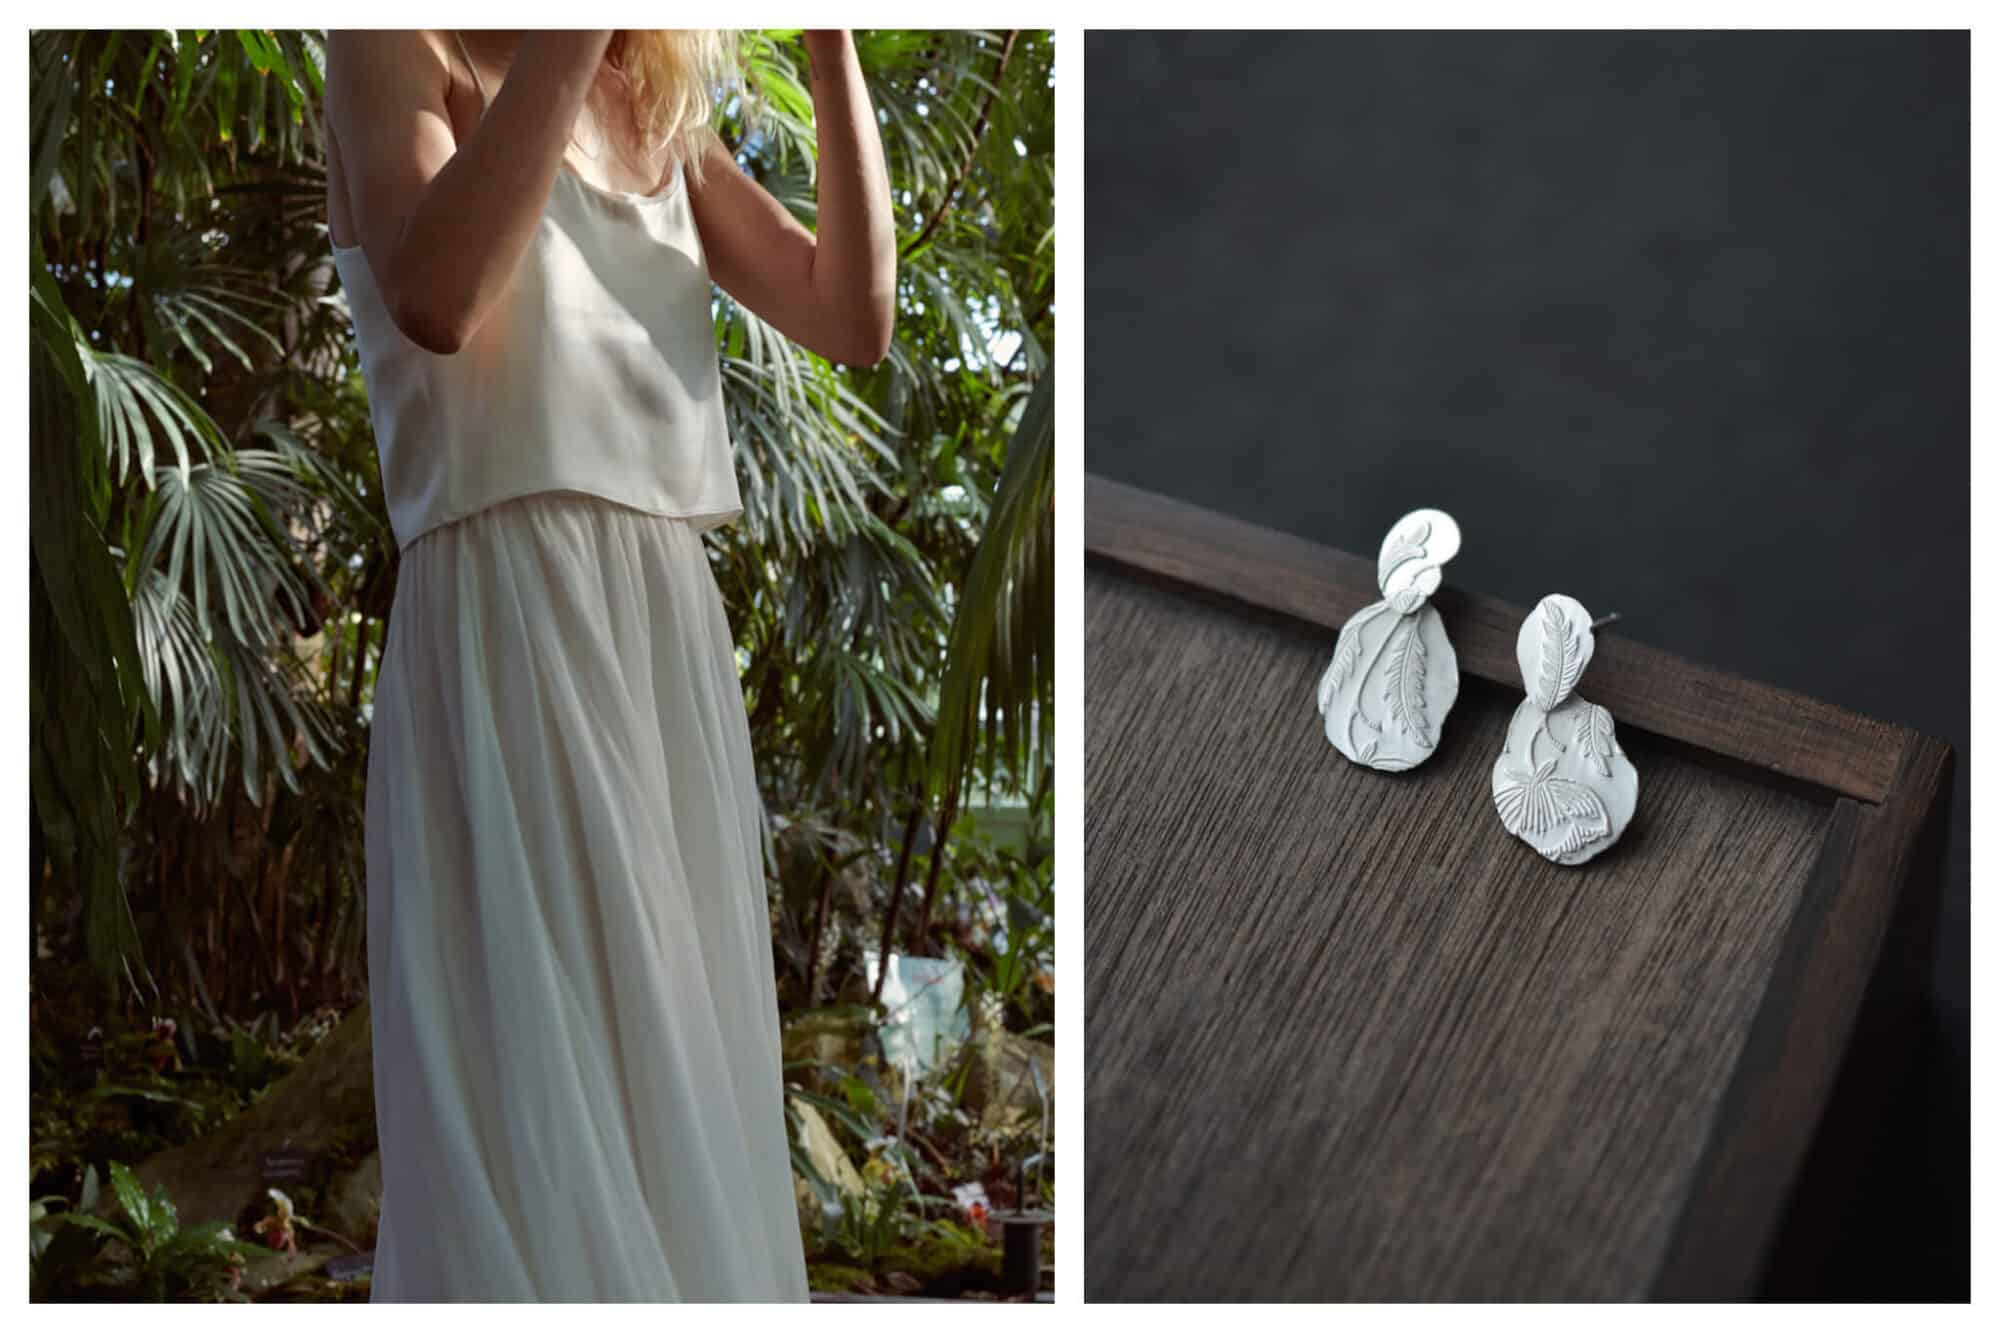 Left: A woman wearing a long white dress stands in front of green plants, Right: A pair of hand-made silver earrings sit on a wood table